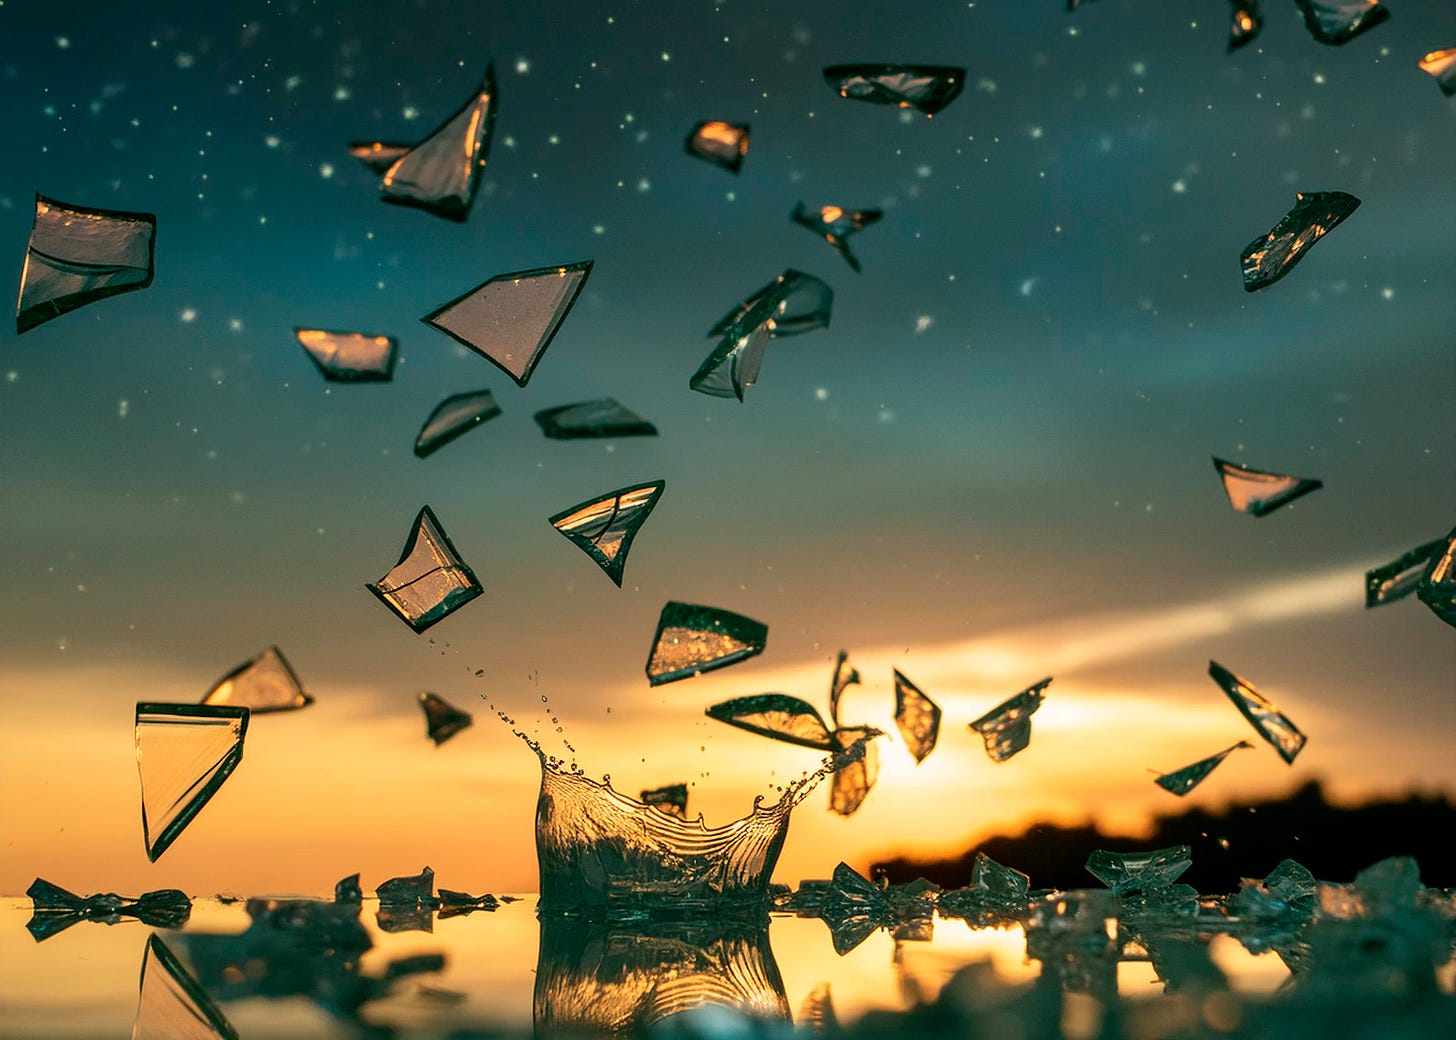 beautiful surreal image of shattered glass reflecting night sky above and splash of water below